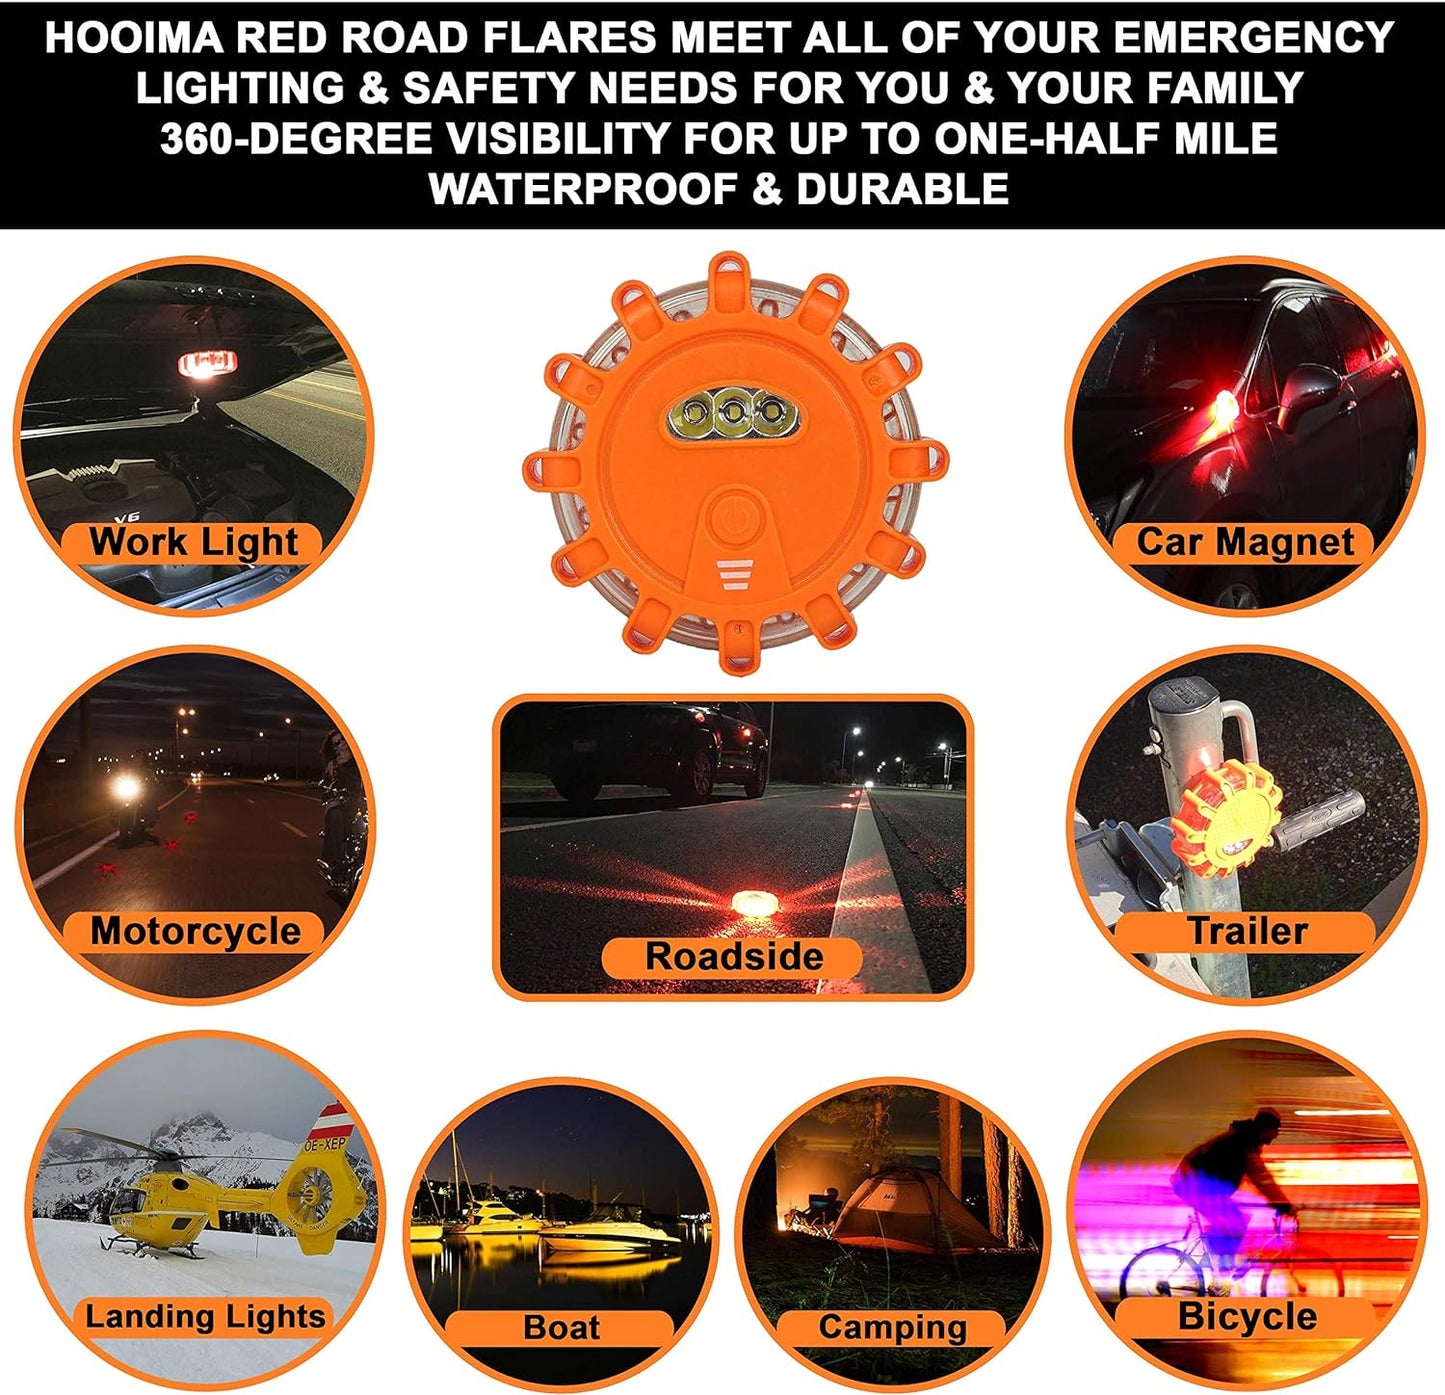 Magnetic Emergency LED Road Flares Warning Kit | Car Roadside Safety Lights | Up to 1.5 Mile Flashing View | 4 Red Light Beacon Disk & 1 Working Flashlight | For Vehicle, Boat, Truck, Flood & More